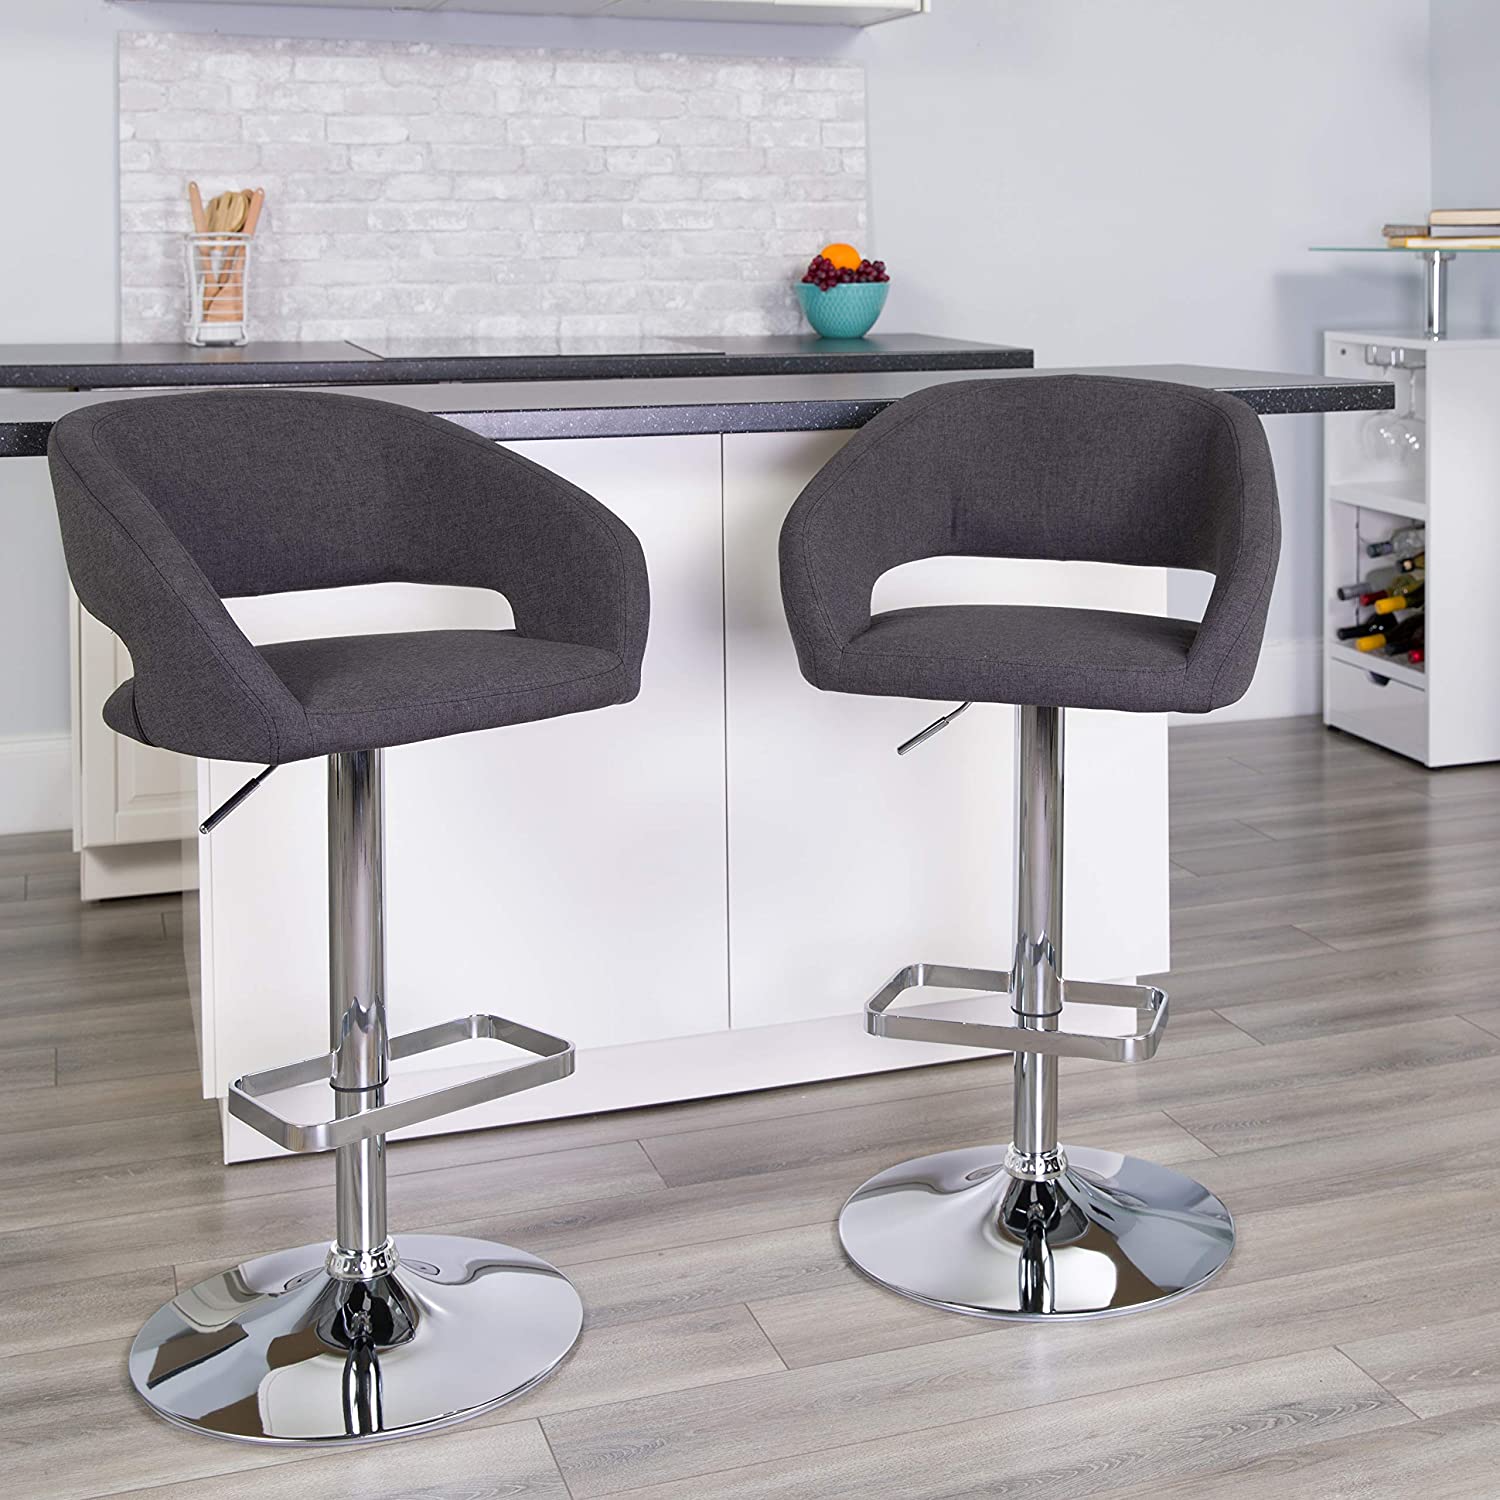 Fabric Adjustable Height Barstool with Rounded Mid-Back and Chrome Base $77.27 (REG $205.00)